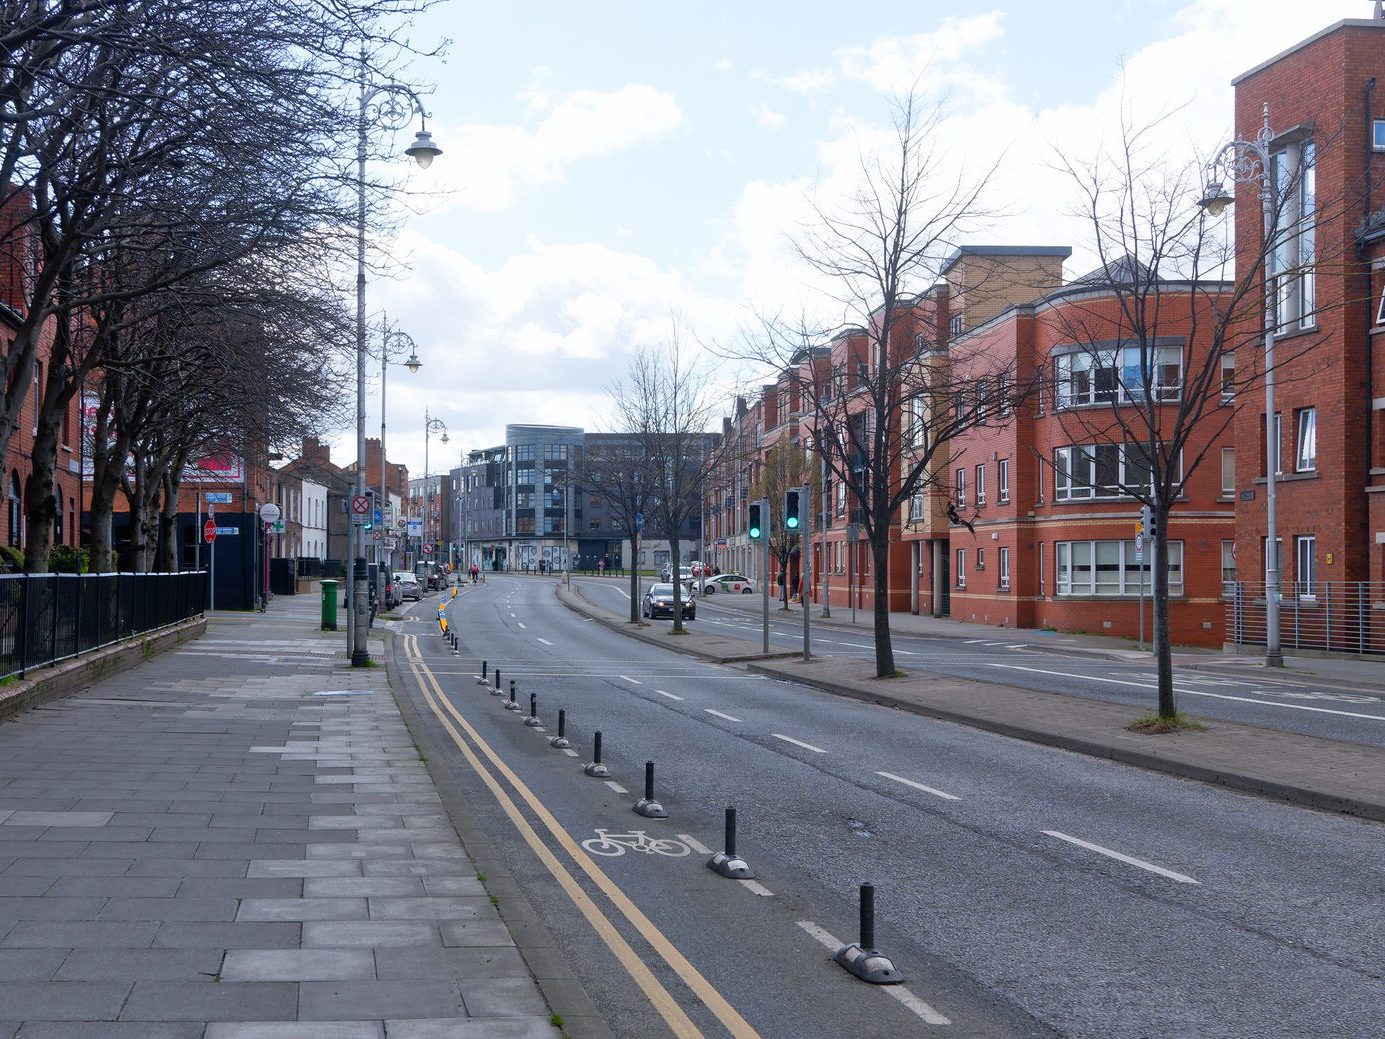 I WALKED ALONG NEW STREET SOUTH AND CLANBRASSIL STREET 006